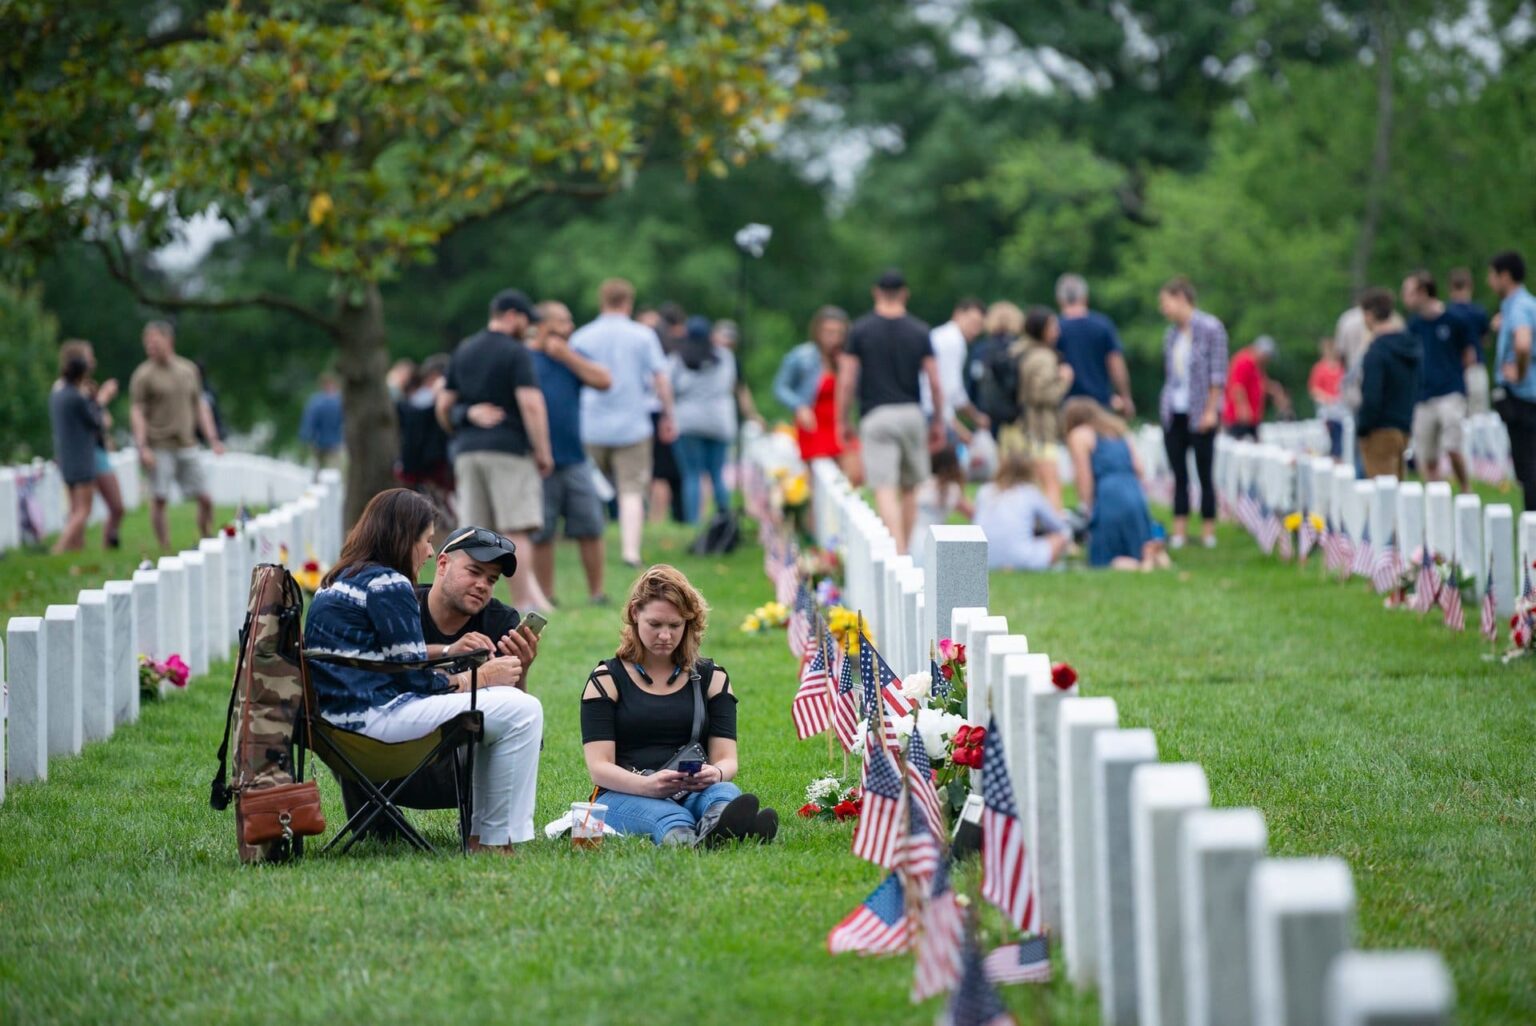 Memorial Day 2024 Traditions, Lessons, And Inspiring Quotes